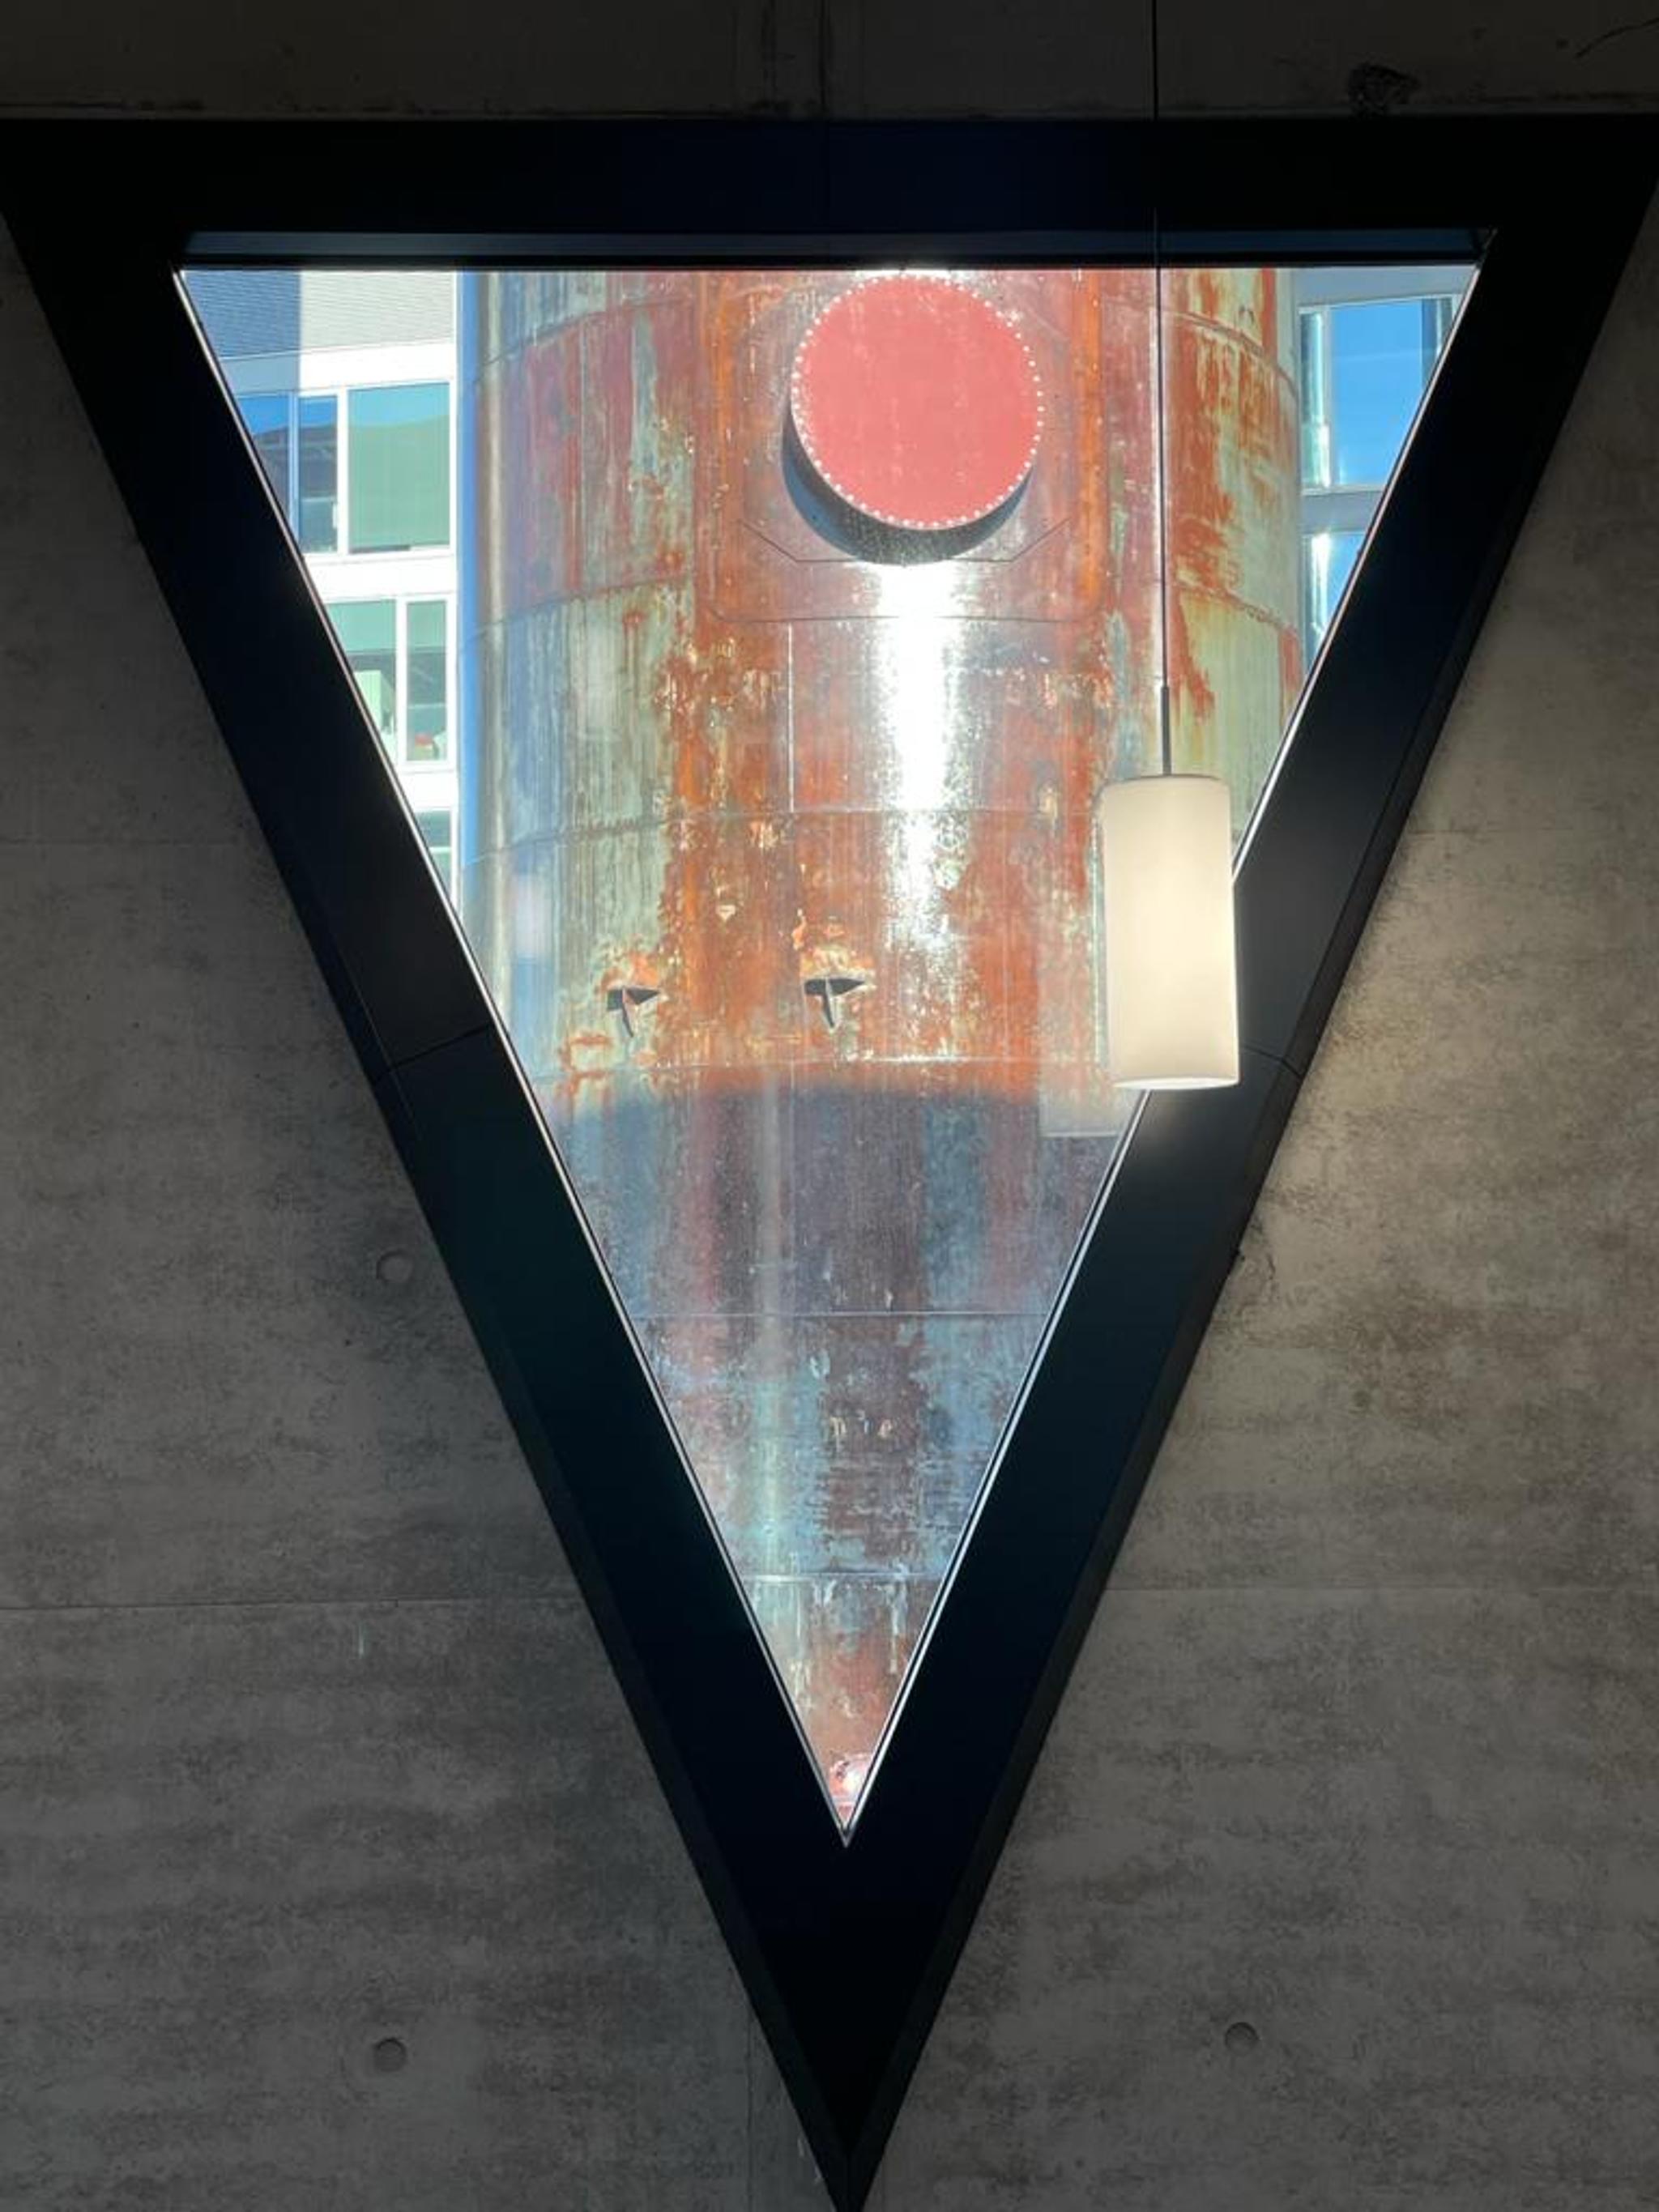 A metal industrial tube is seen through a triangular window with a black frame.